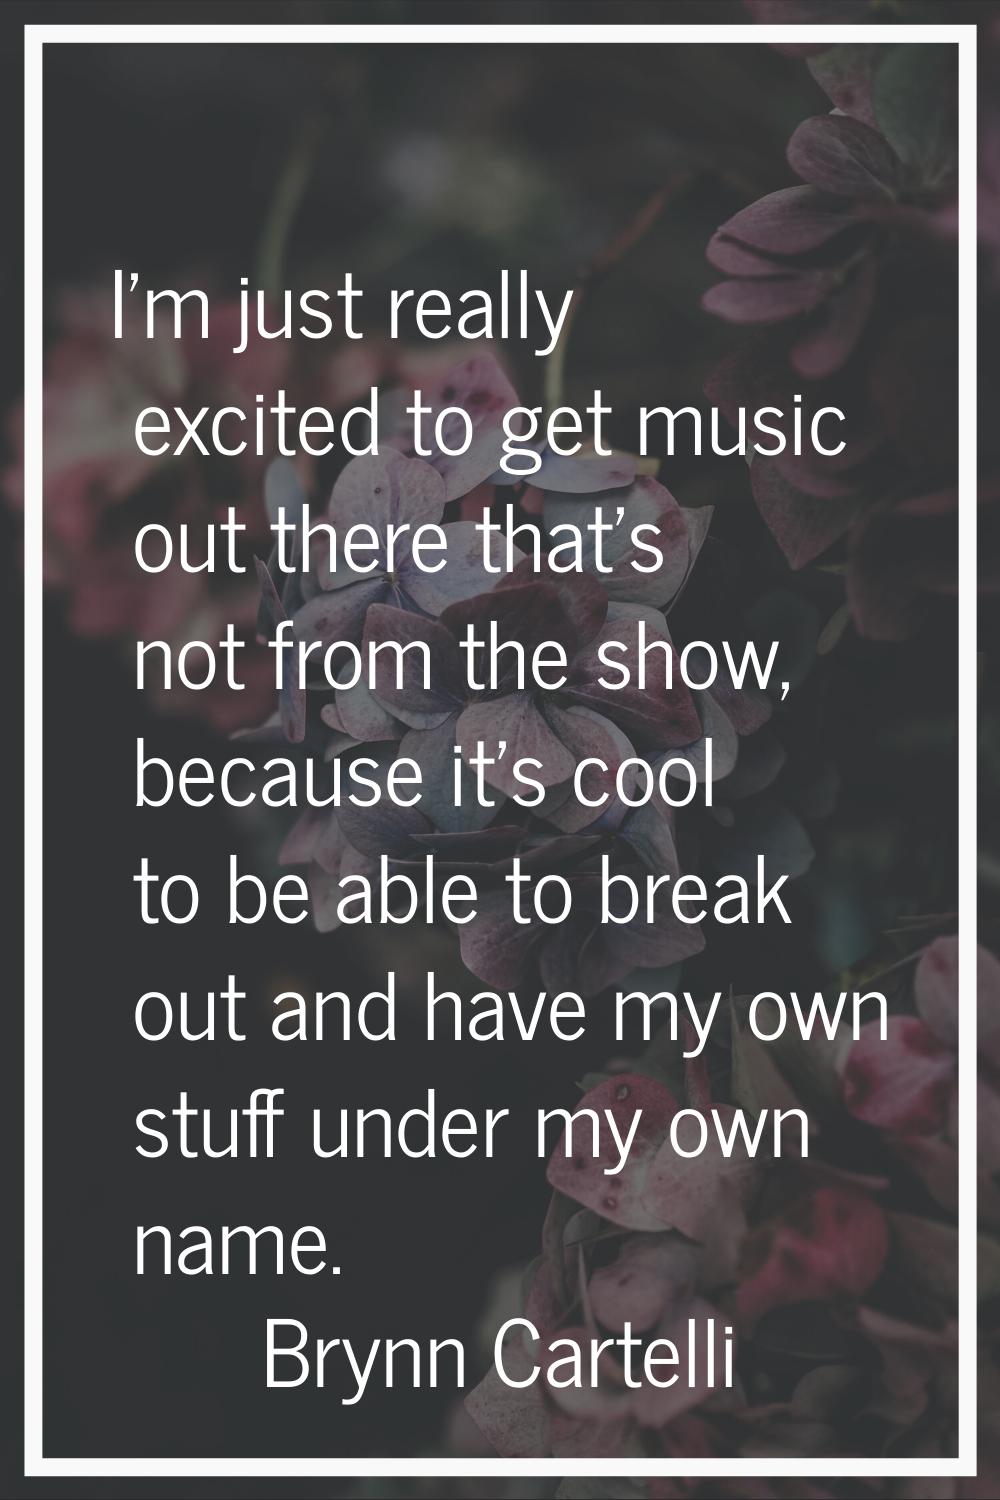 I'm just really excited to get music out there that's not from the show, because it's cool to be ab